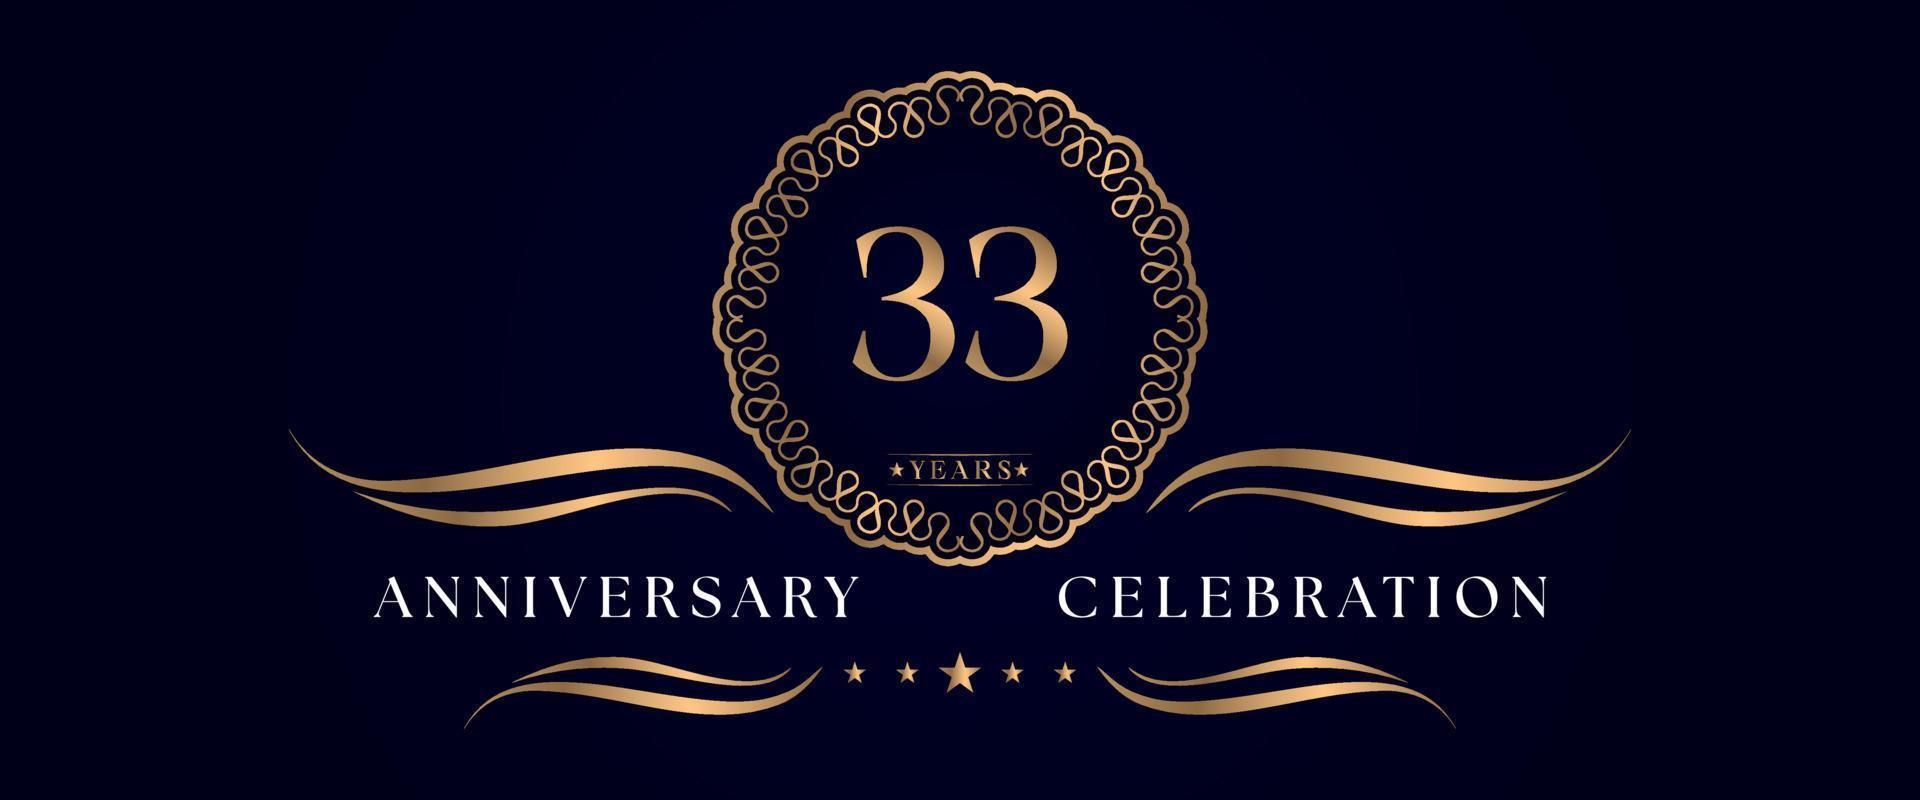 33 years anniversary celebration with elegant circle frame isolated on dark blue background. Vector design for greeting card, birthday party, wedding, event party, ceremony. 33 years Anniversary logo.